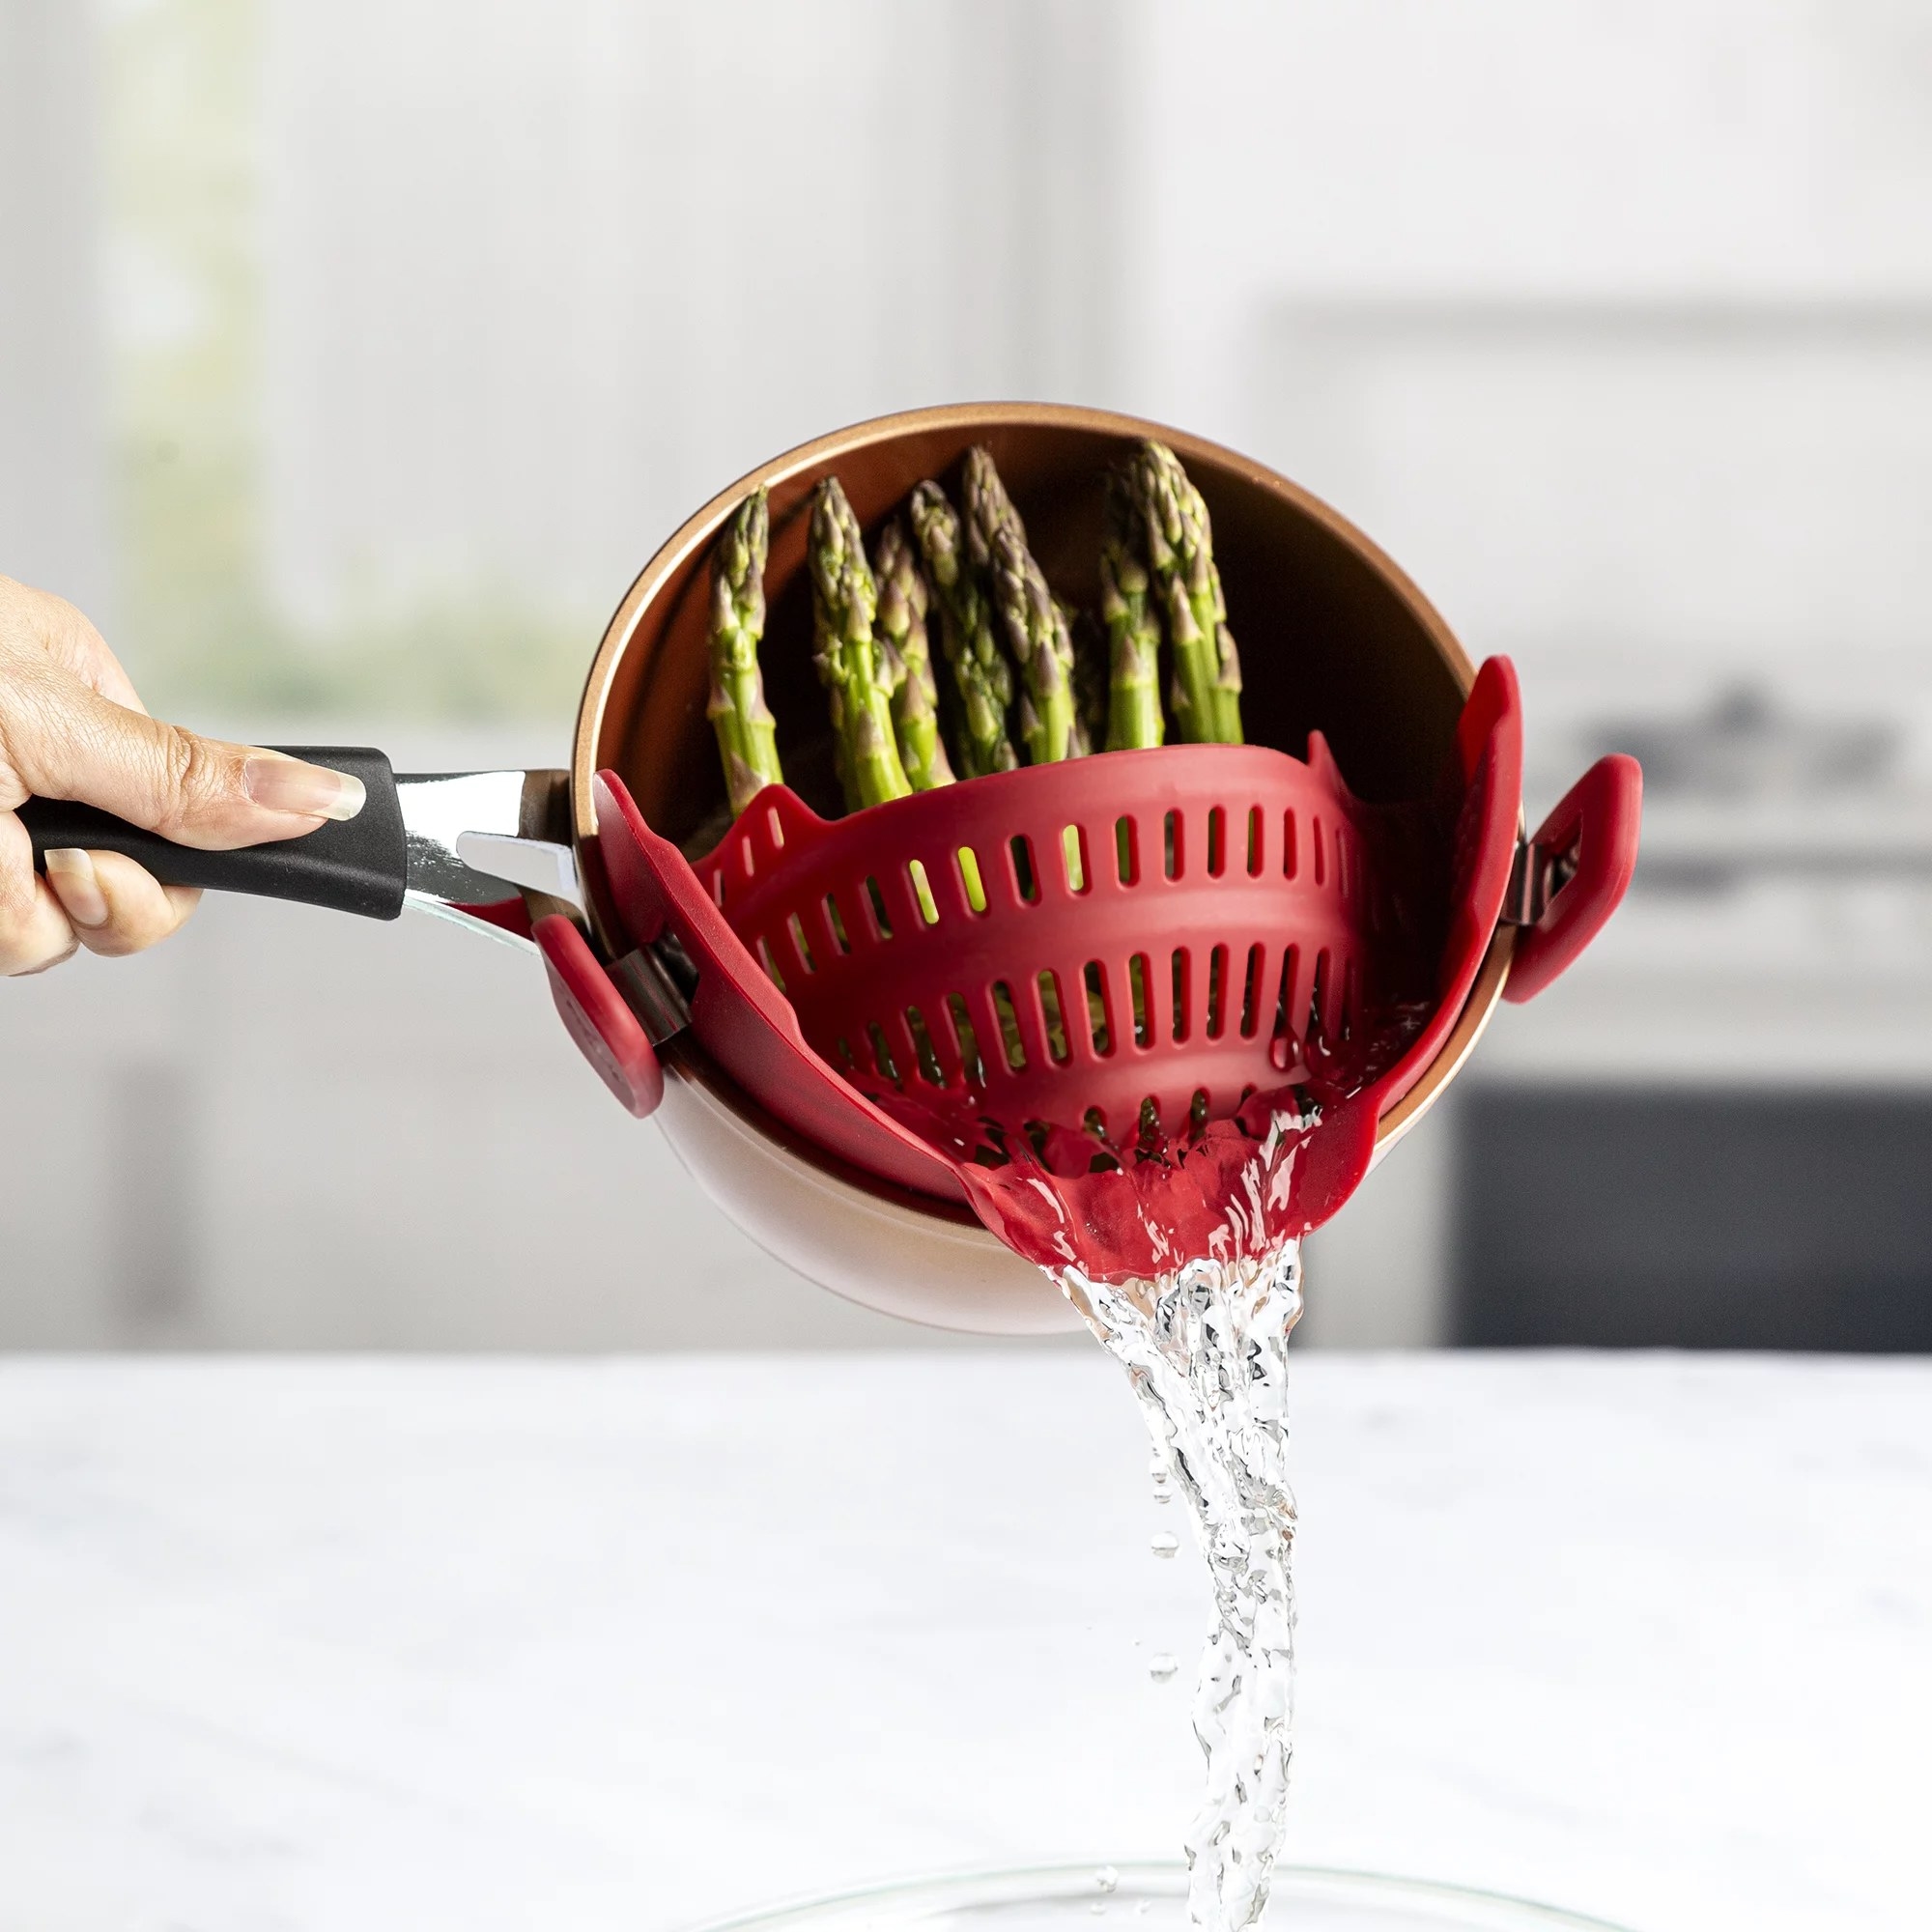 Every chef needs this adjustable silicone clip-on strainer for